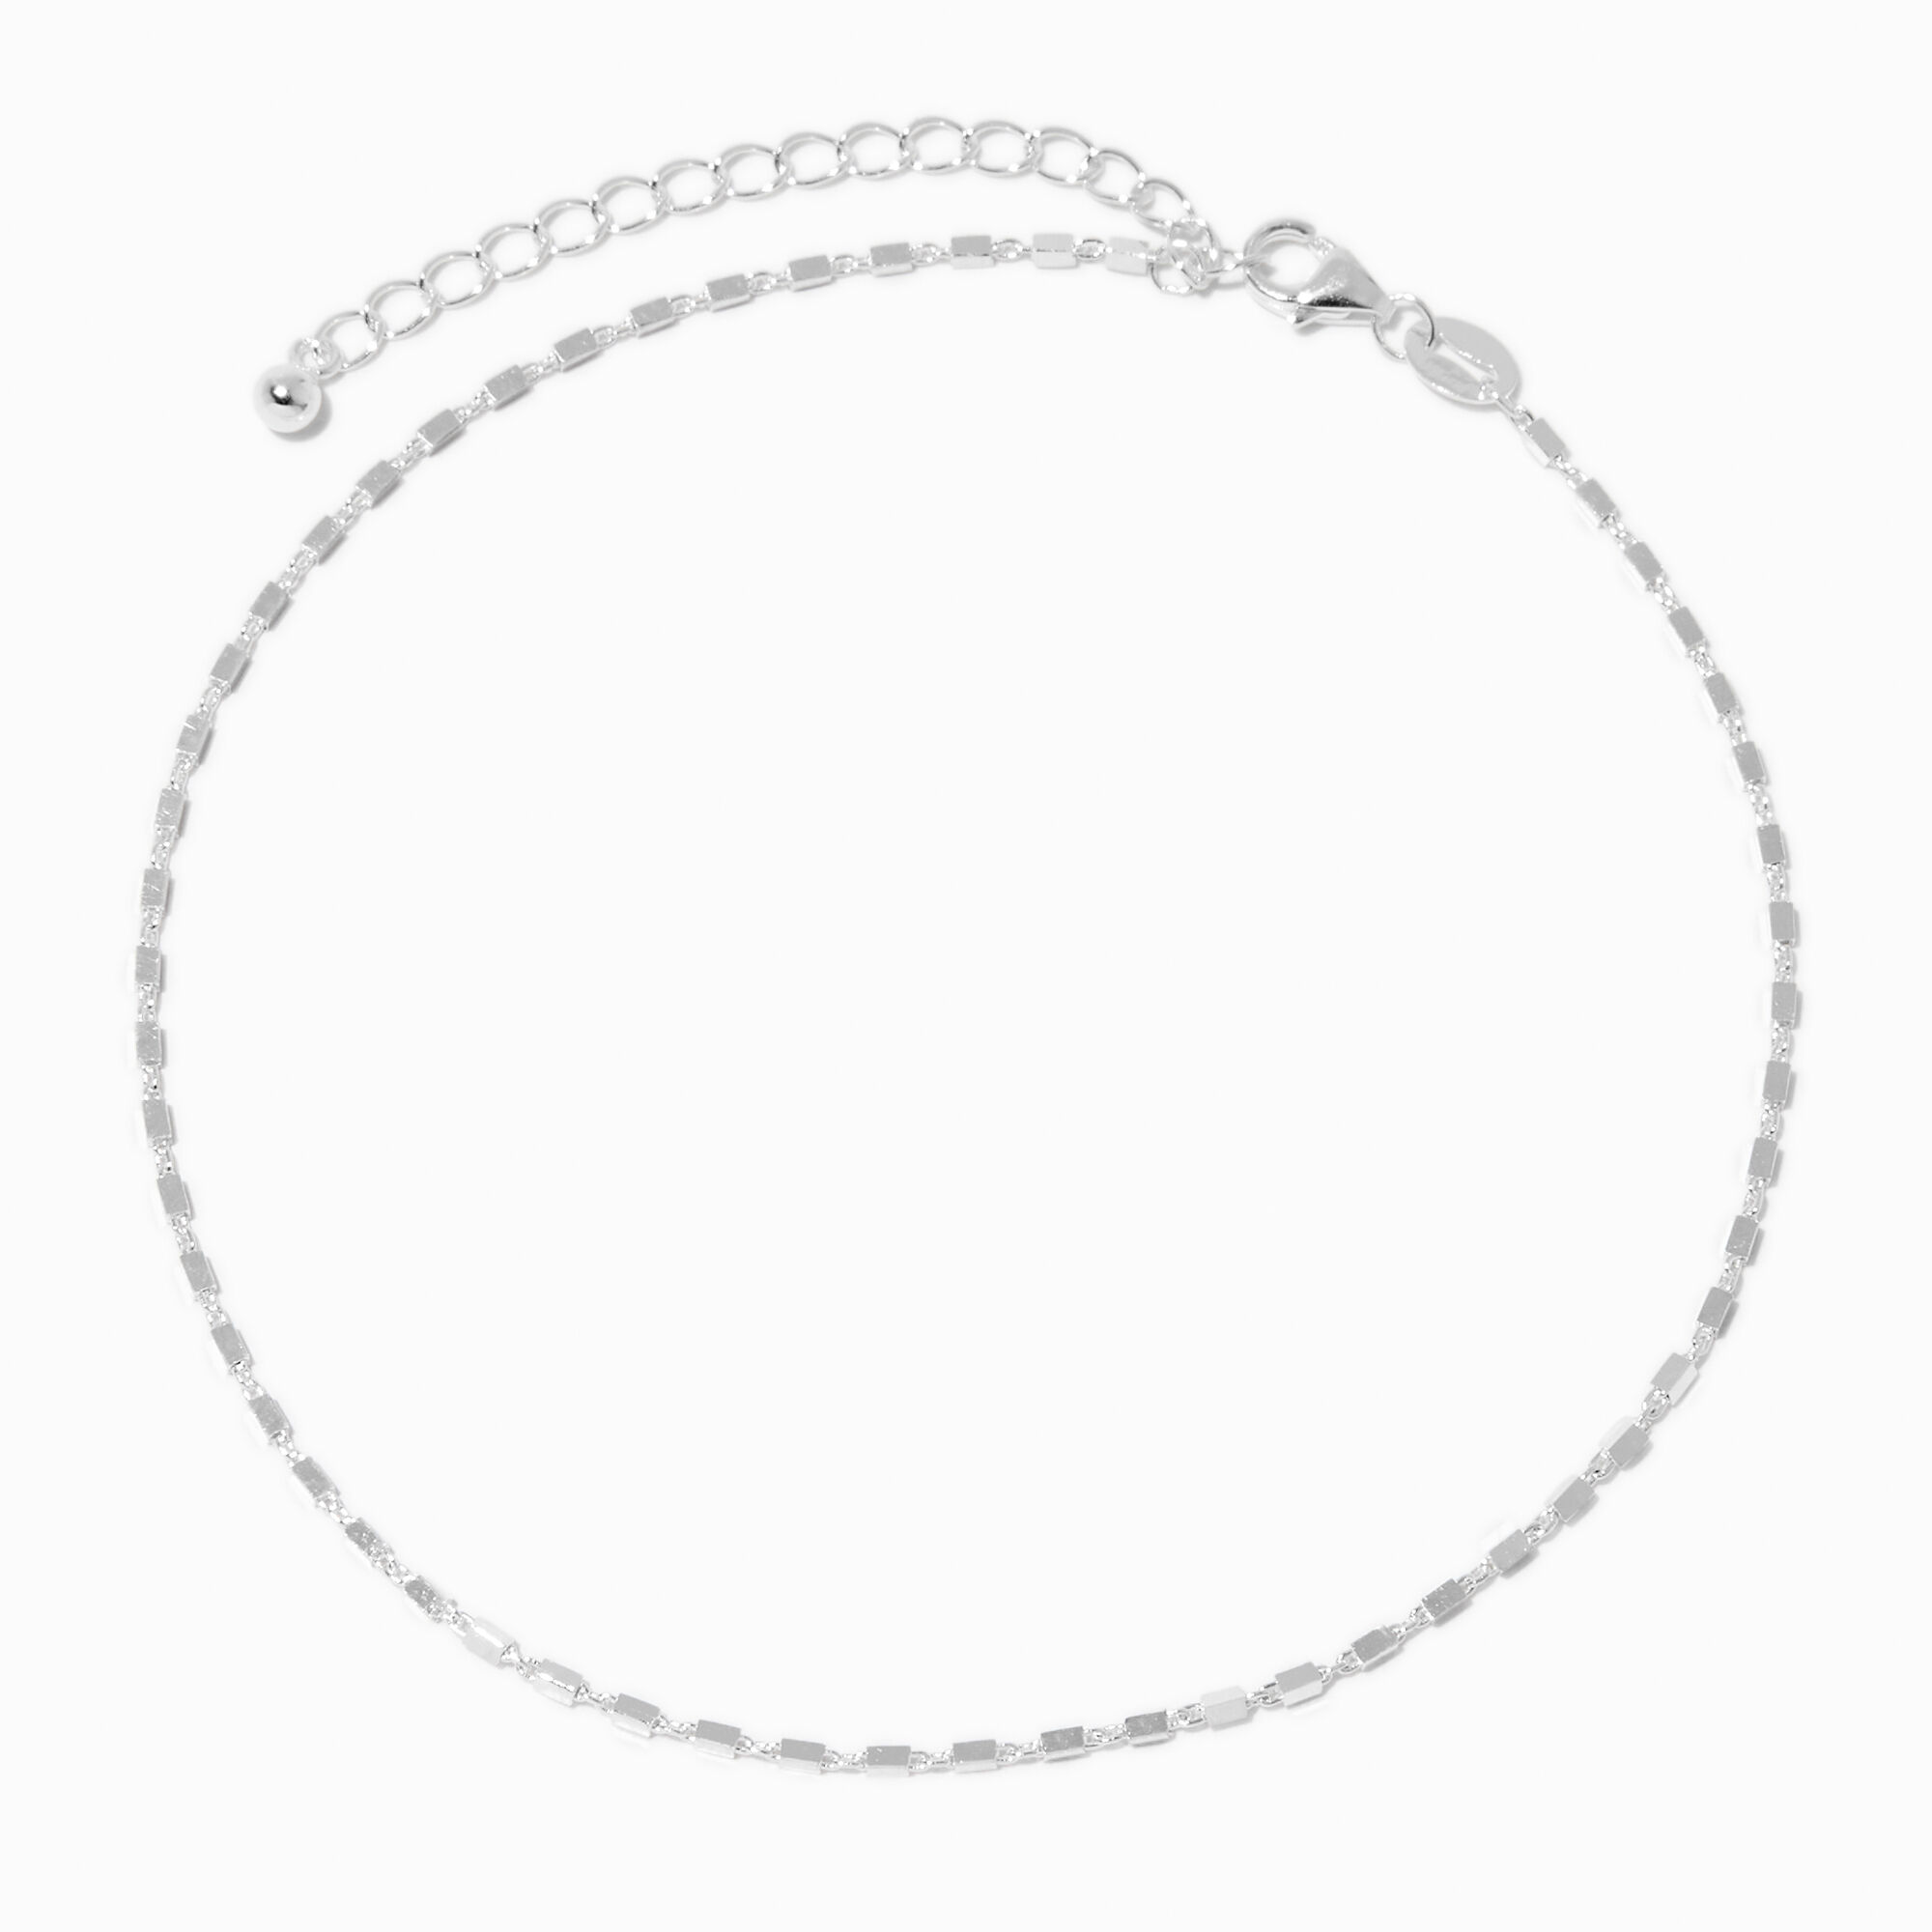 View C Luxe By Claires Bar Chain Anklet Silver information